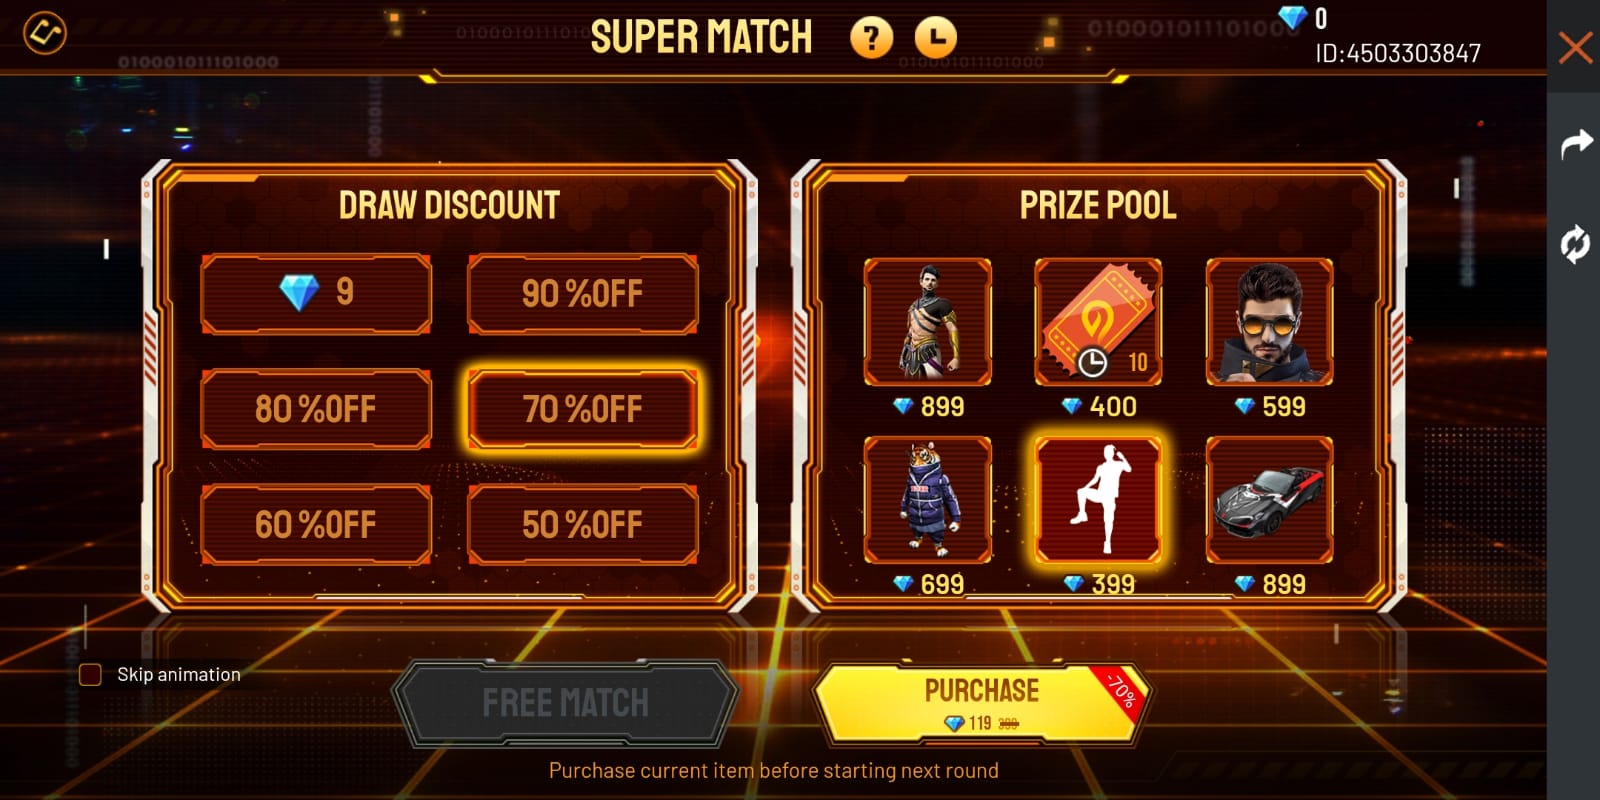 Garena Free Fire Super Match Event: Get a chance to claim cool items including Heatbound Bundle for massive discounts, More Details